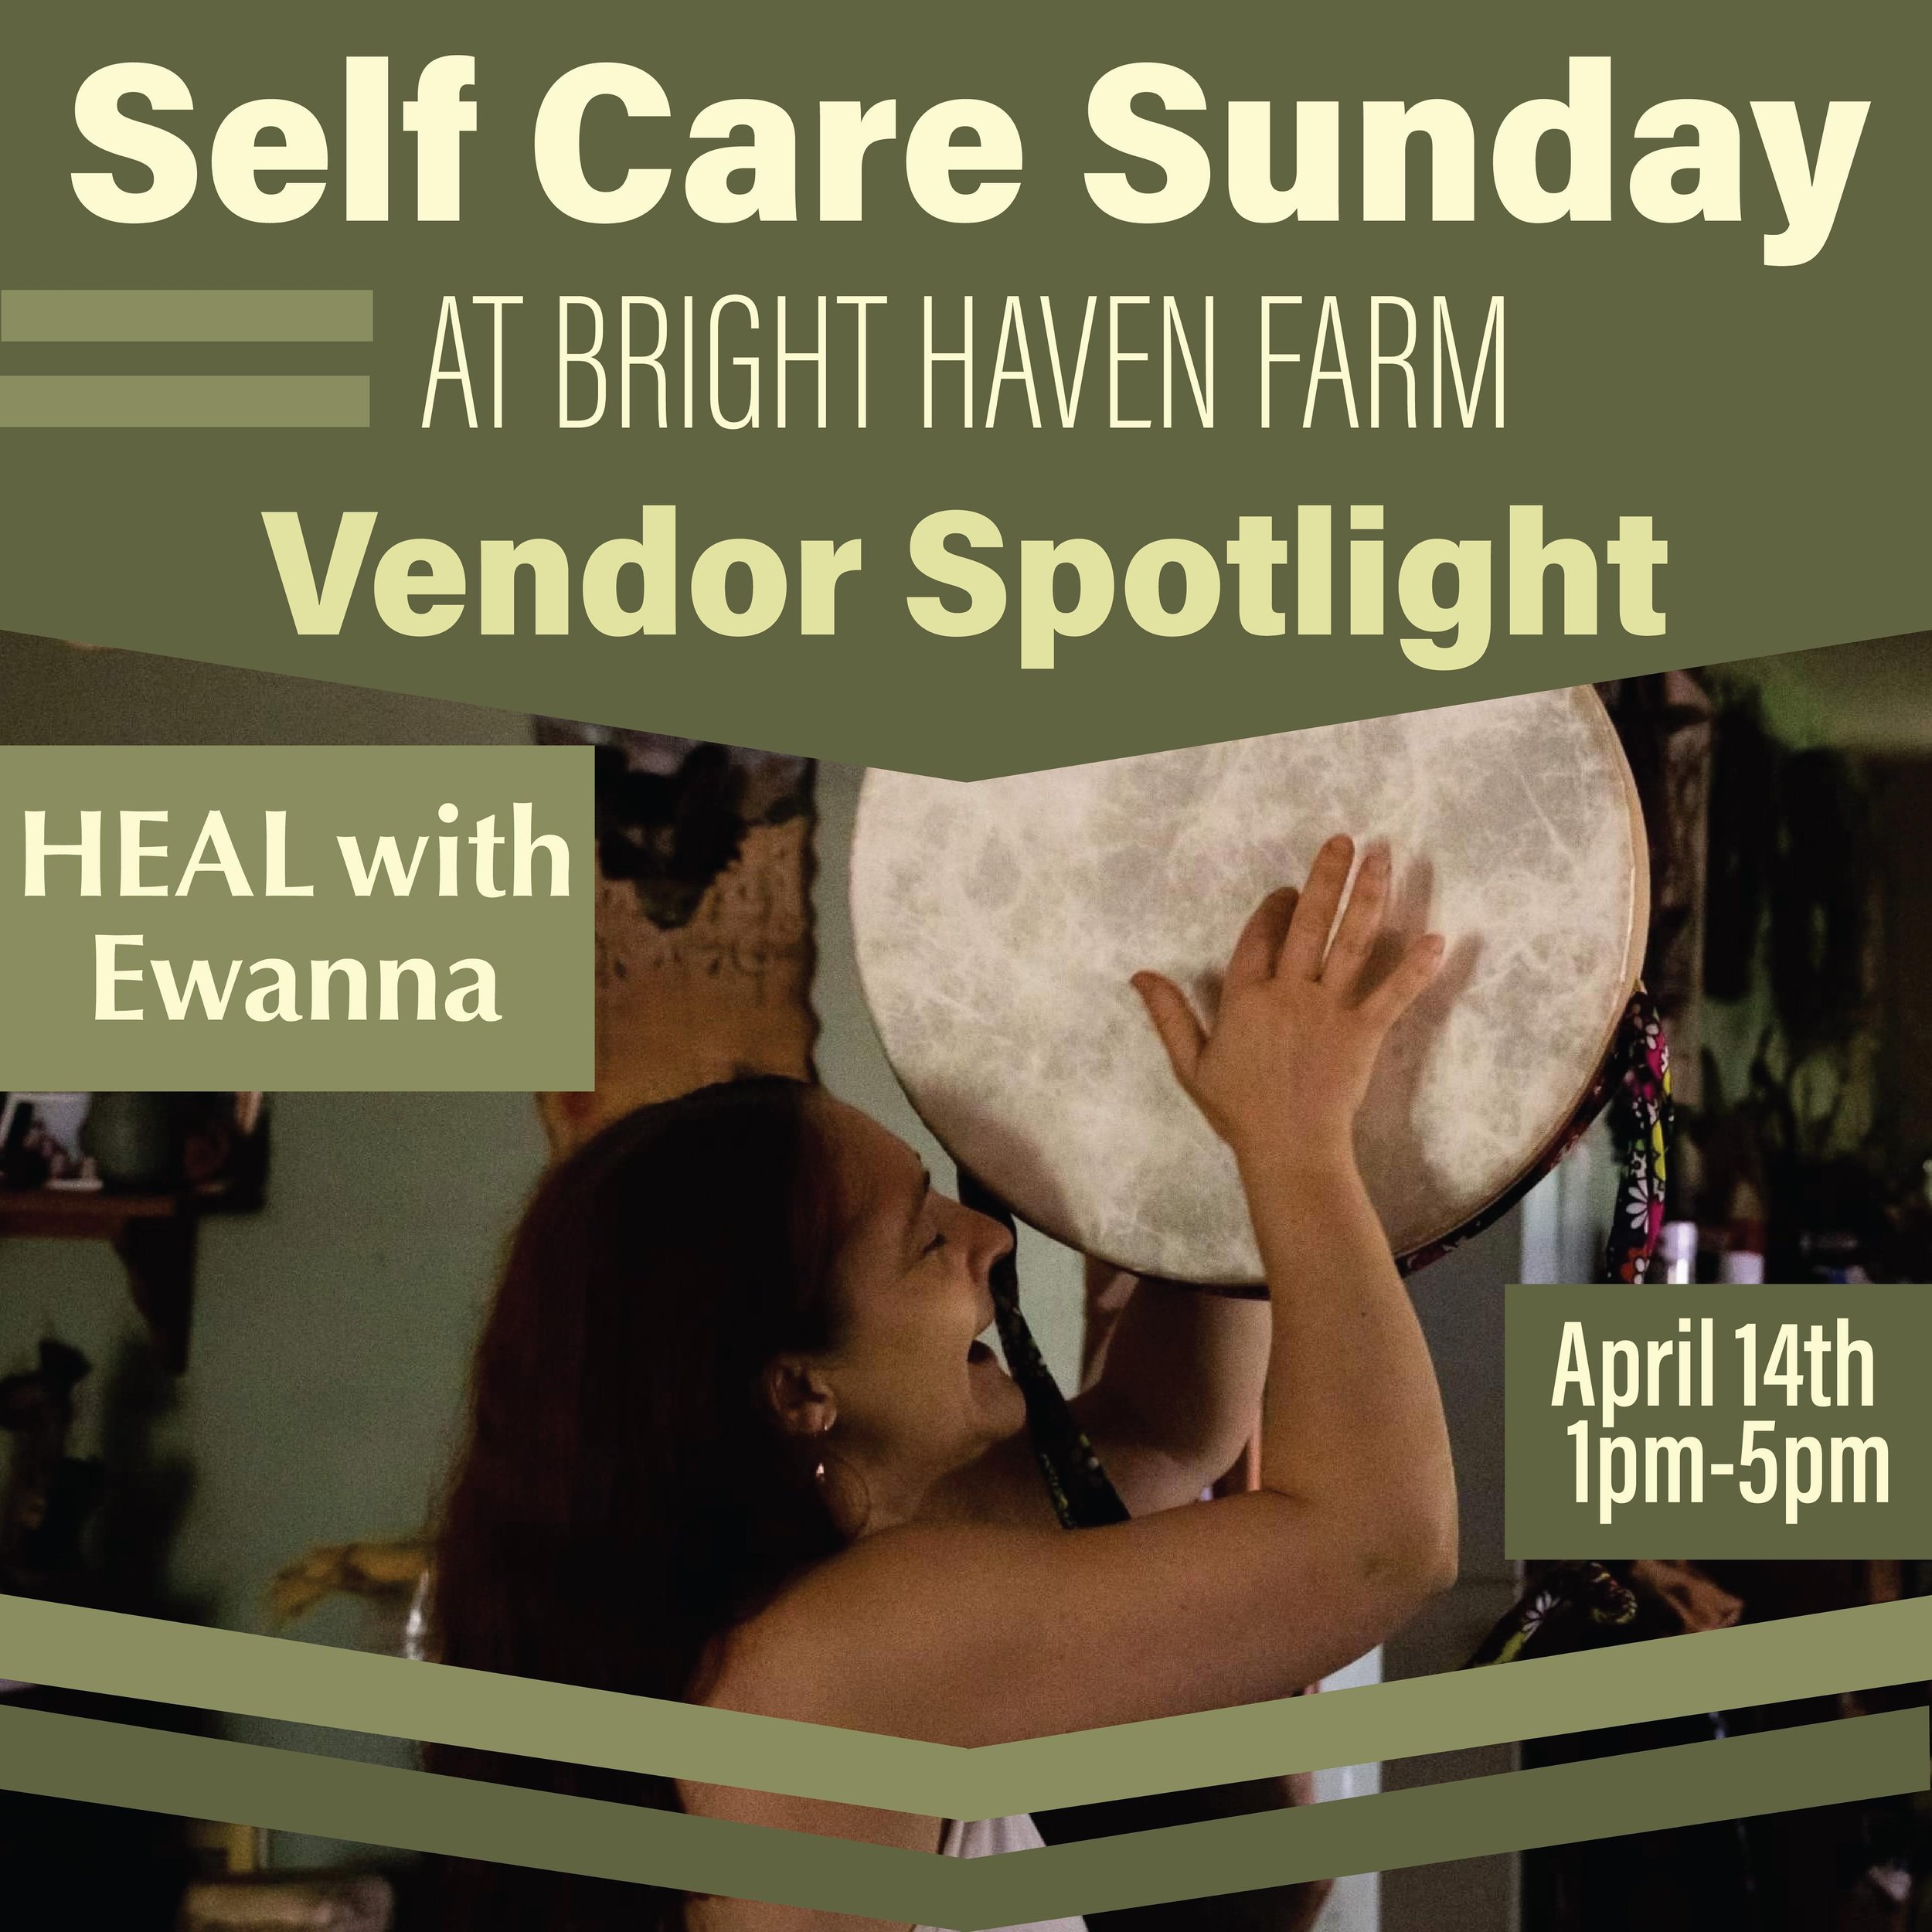 We are so honored to have @ioanaaspasia1970 join us for our Self Care Sunday Wellness fair this weekend! 

Ewanna uses the power of her voice and various percussion and vibrational instruments as healing tools for the physical, emotional, and spiritu